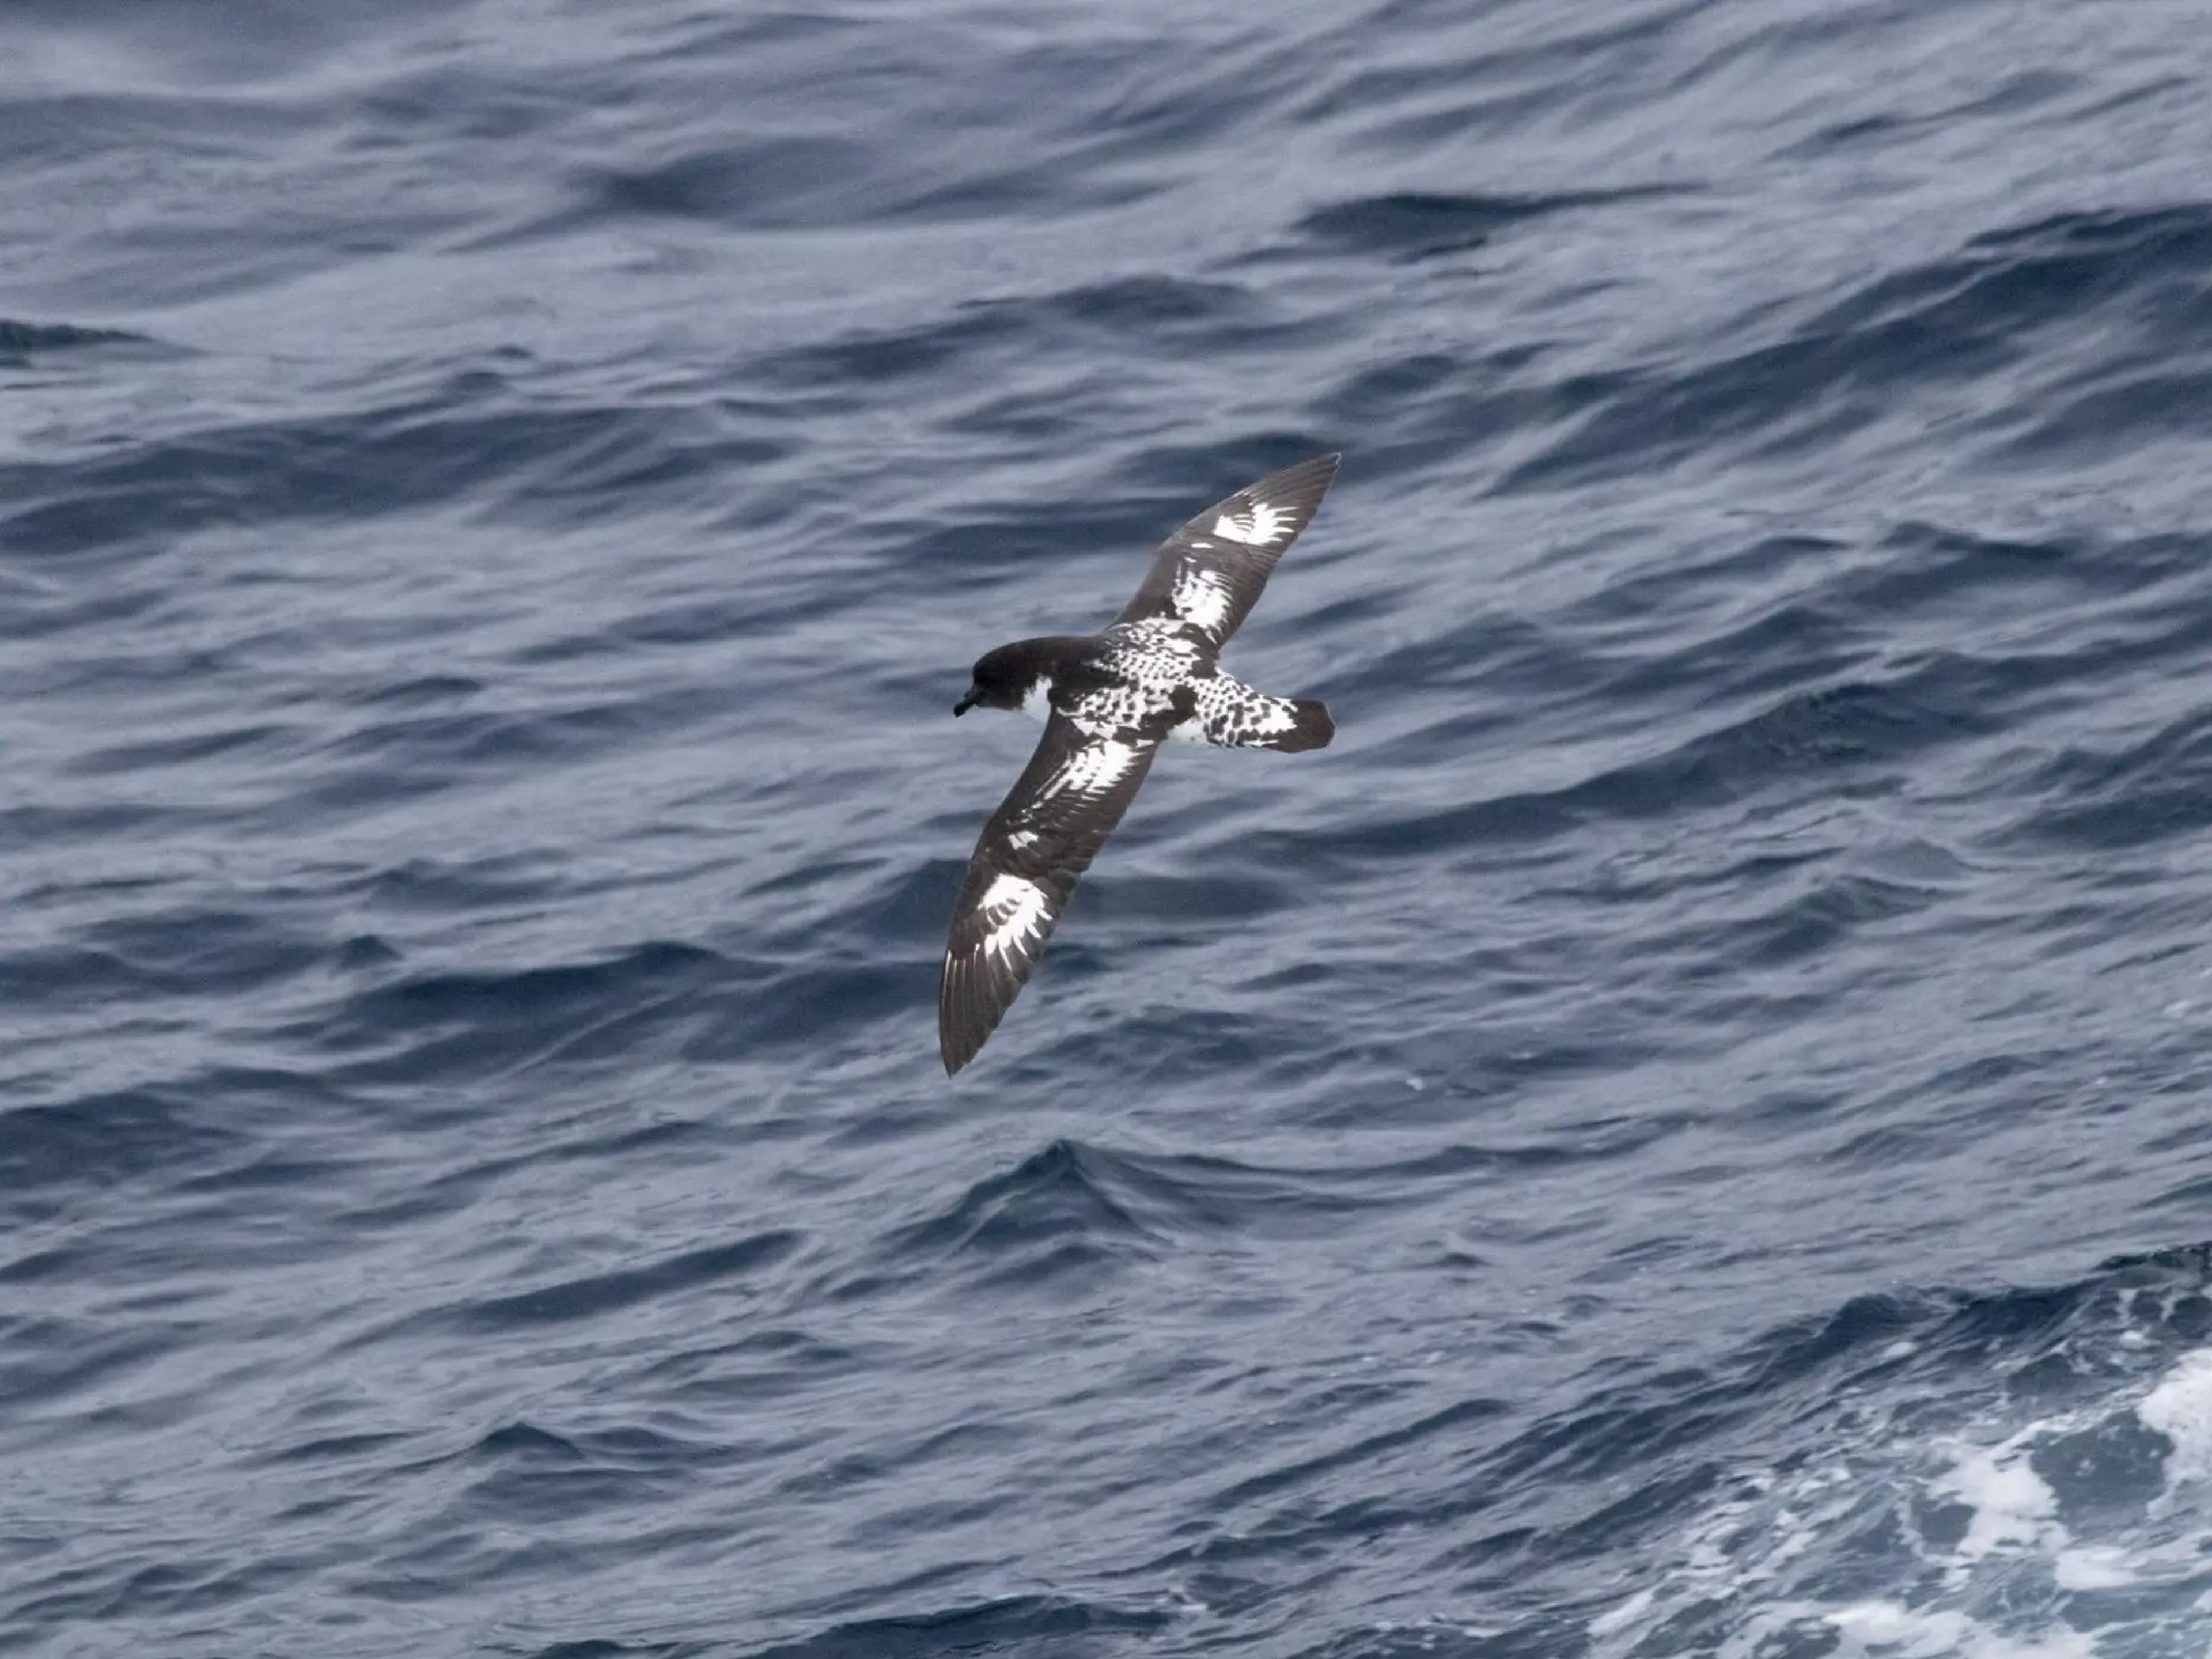 The study of seabirds was one of the lectures, and the expedition team took guests outside to survey and photograph the ones flying around the ship.